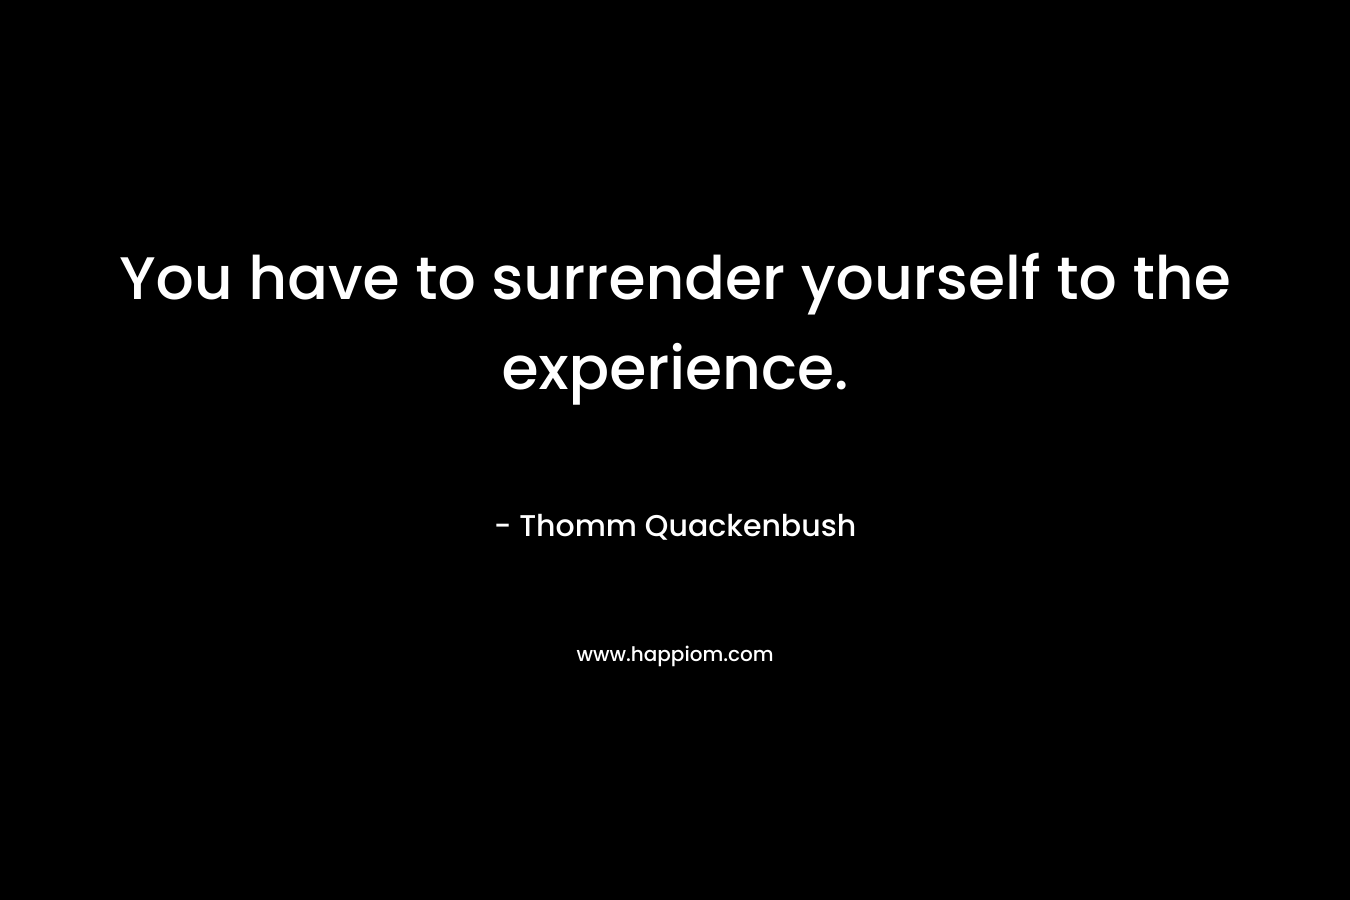 You have to surrender yourself to the experience.